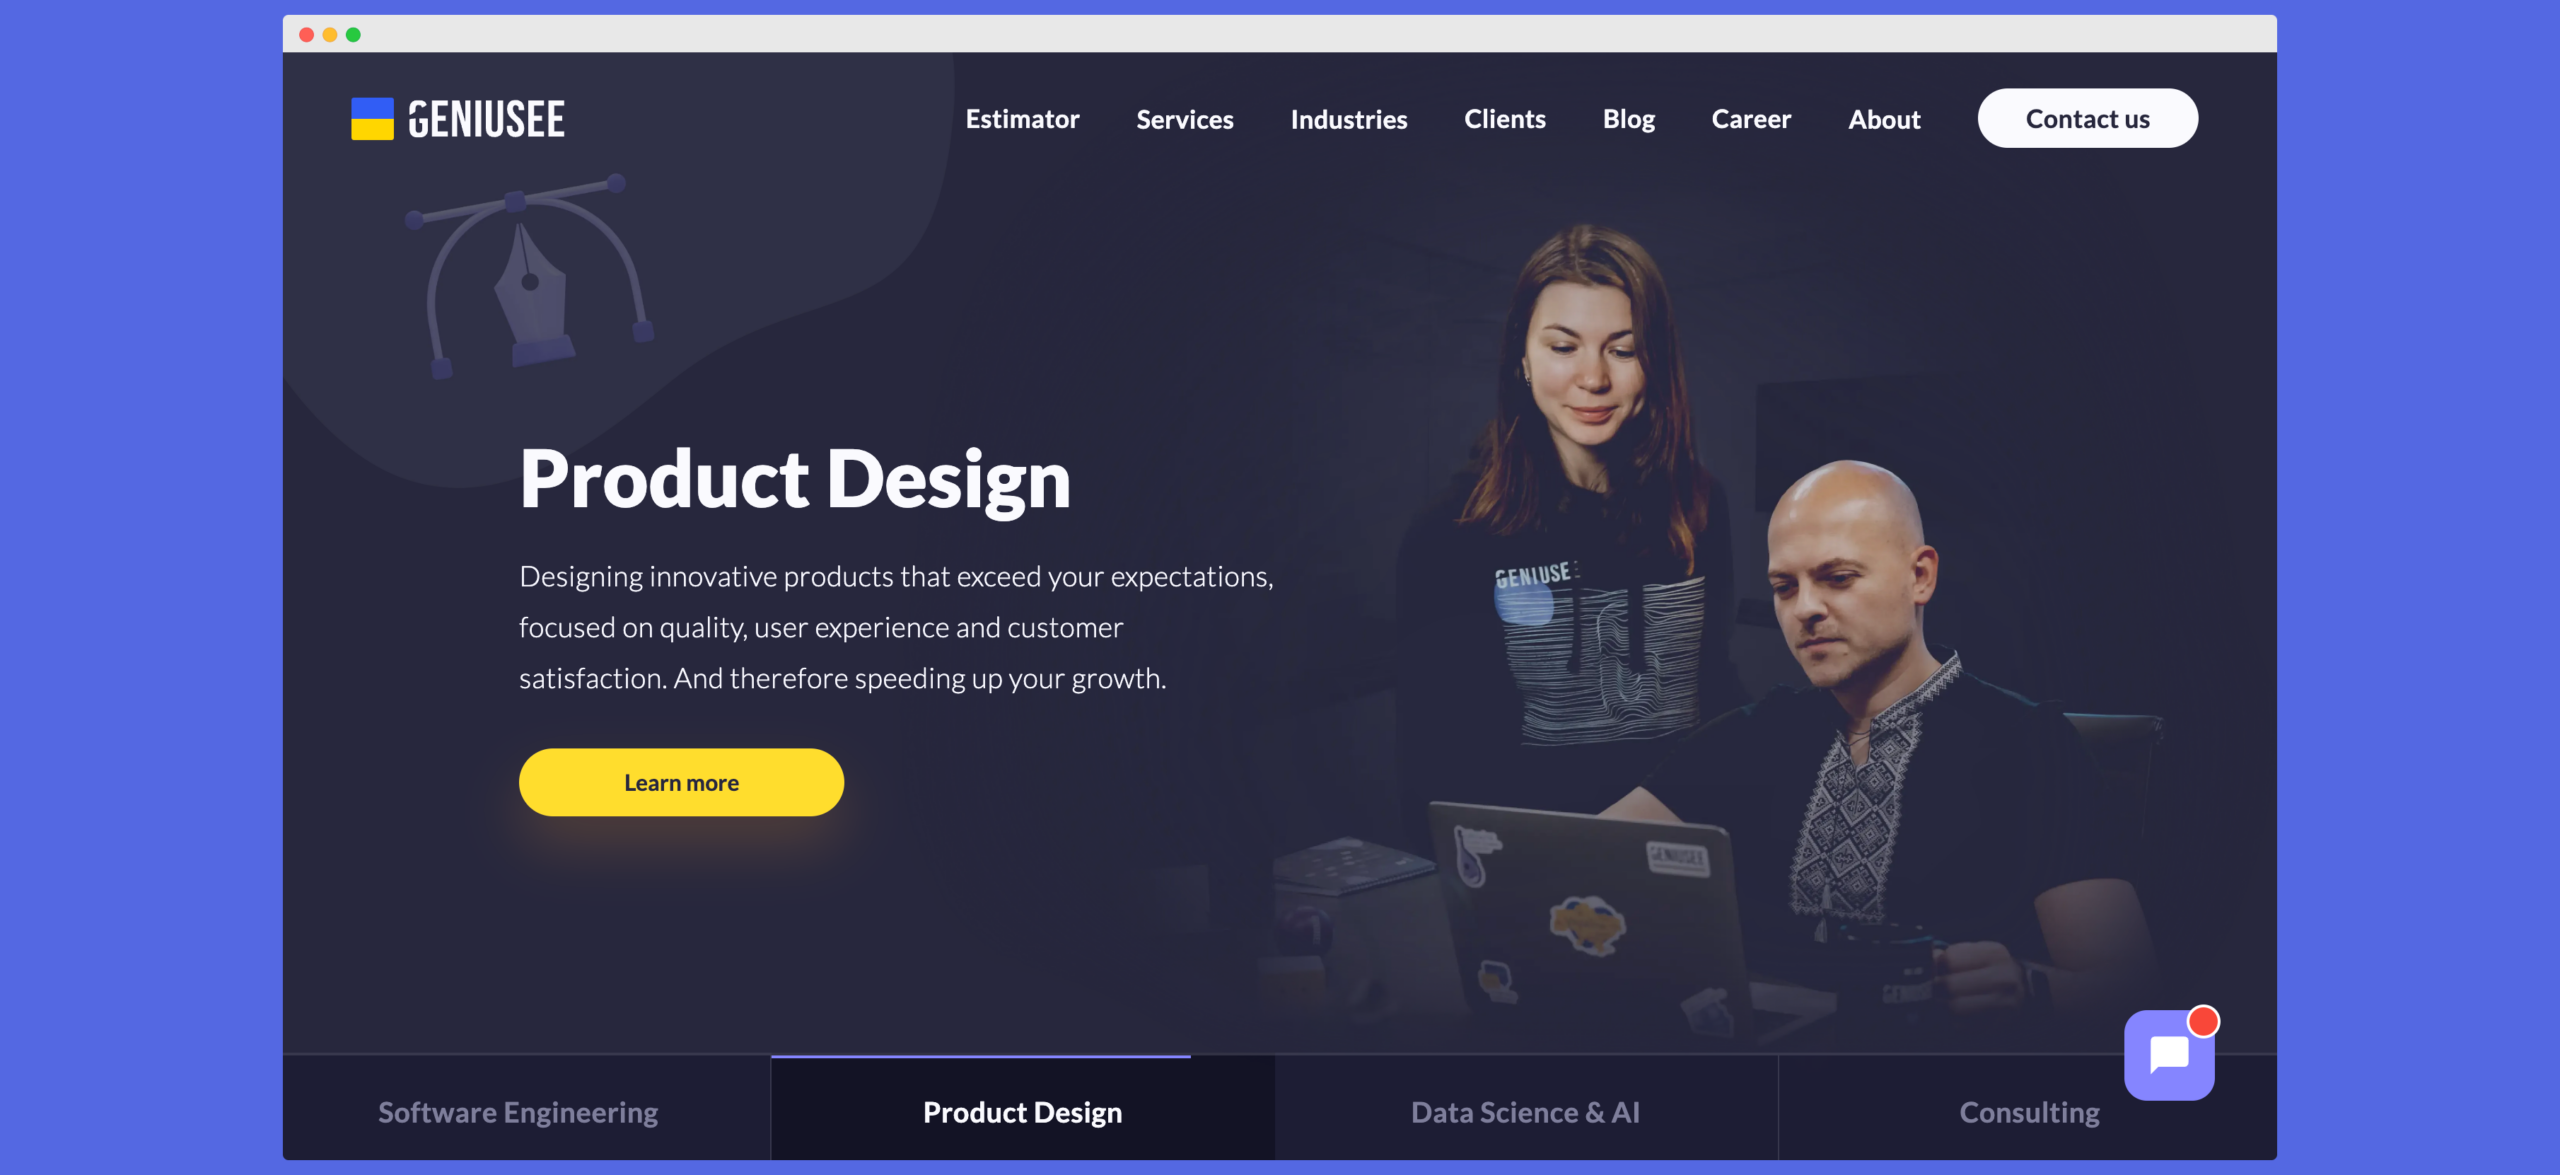 geniusee - ukrainian software engineering, product design and digital consulting company website